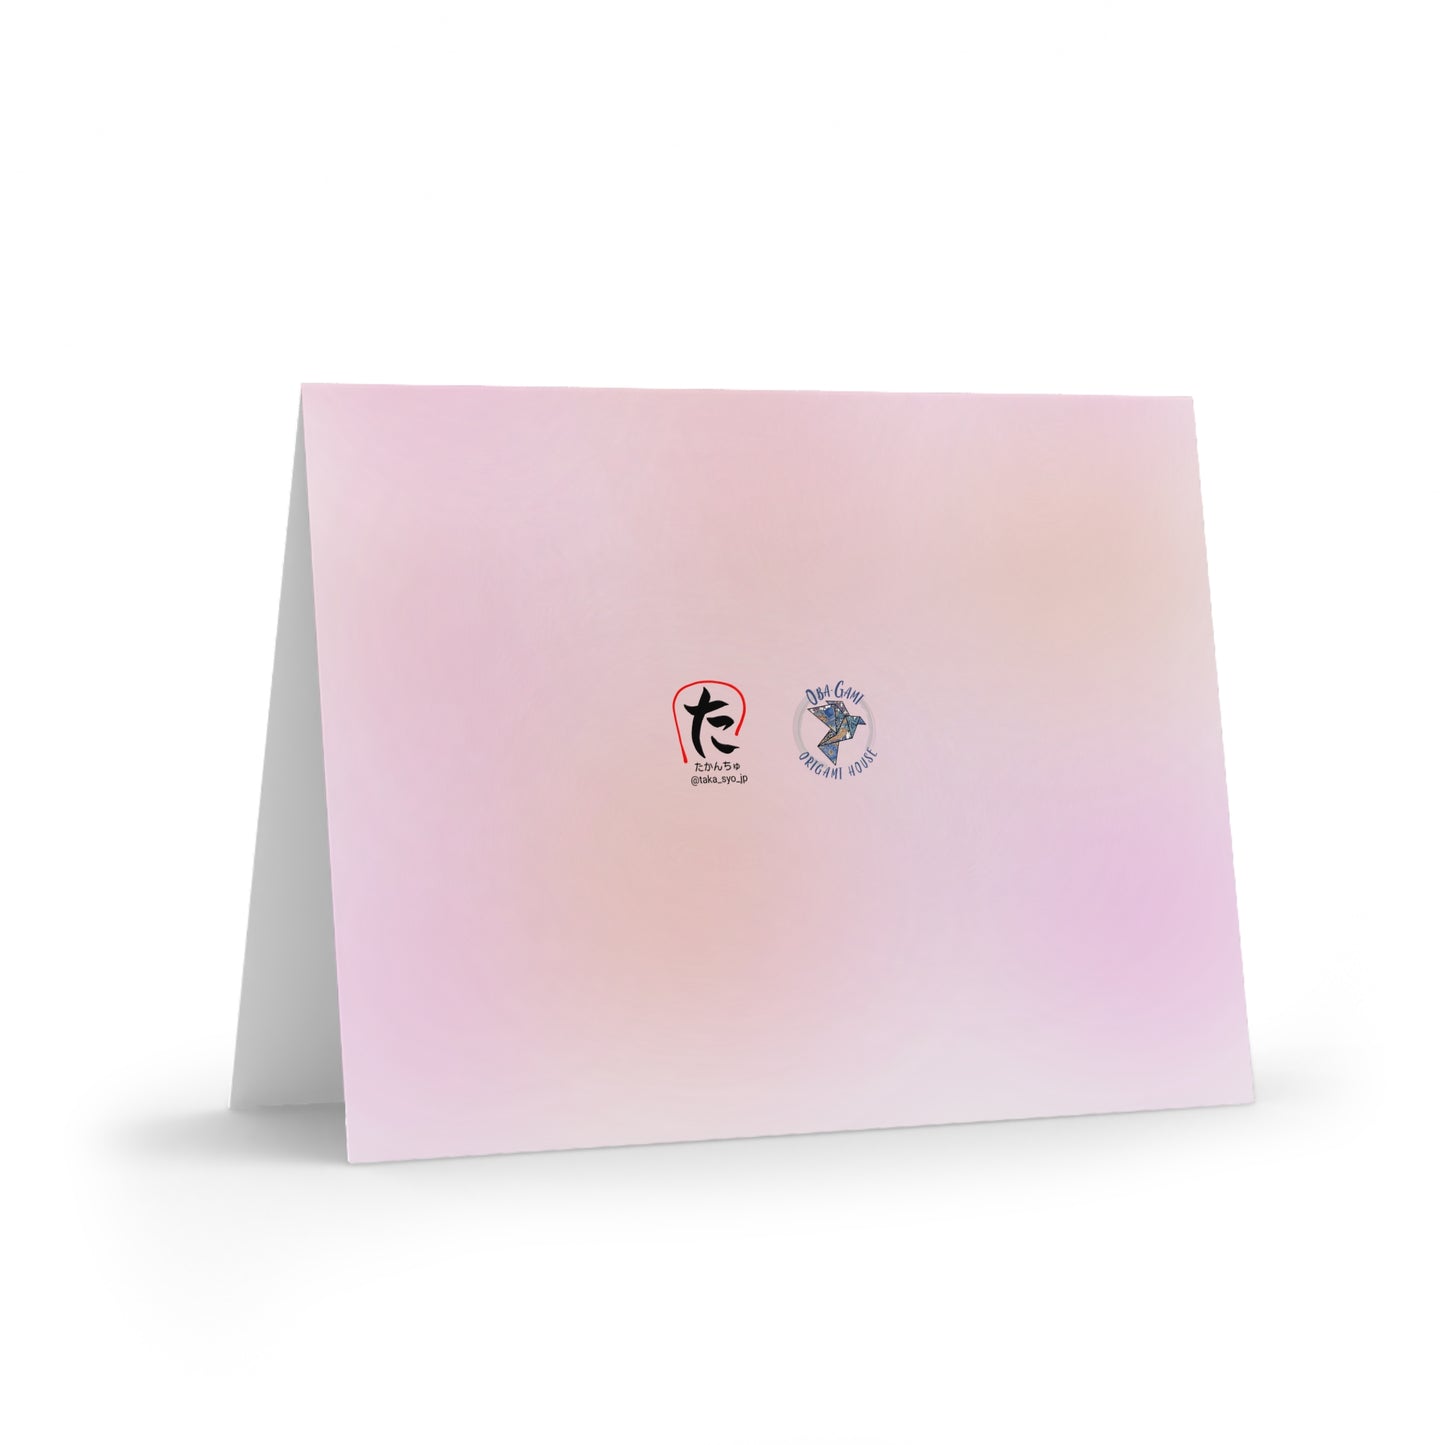 Happy Birthday! : Japanese Greeting Cards Pink (8, 16, and 24 pcs)